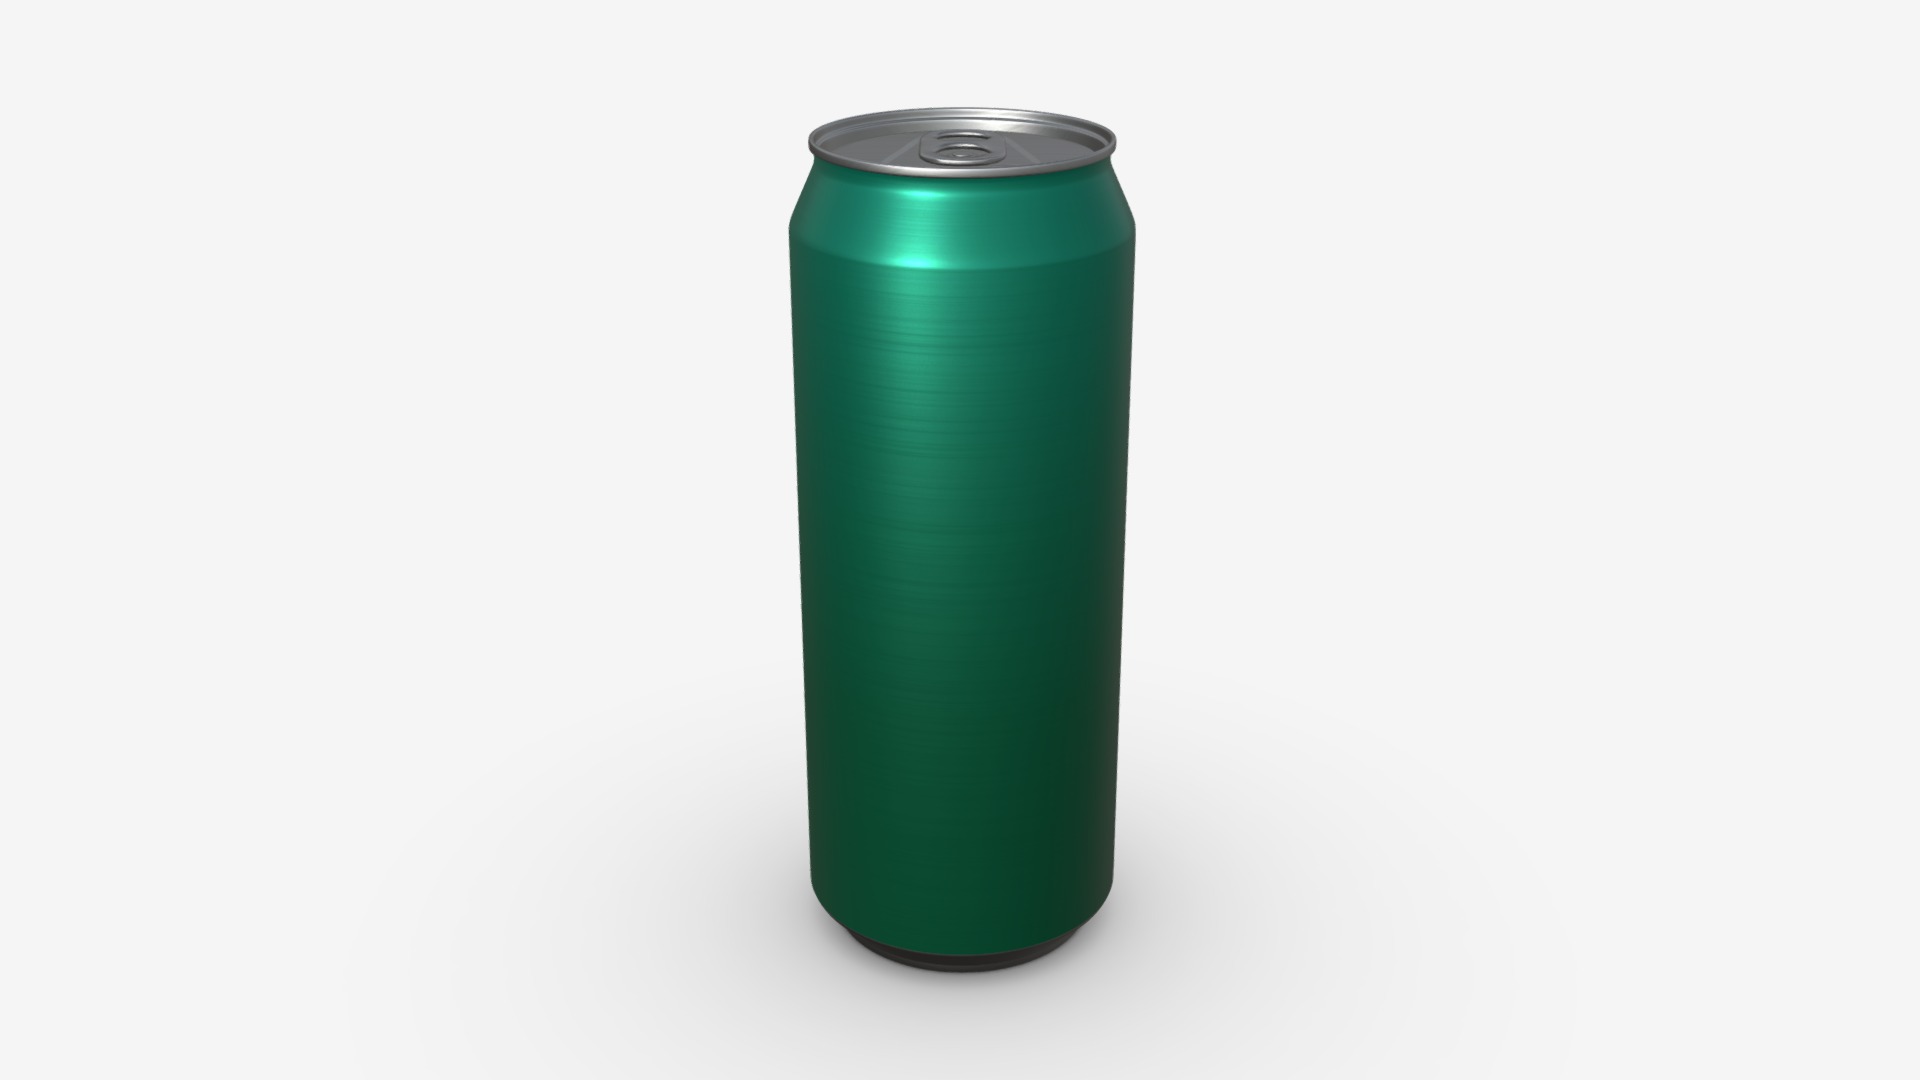 3D model Standard beverage can 500ml - This is a 3D model of the Standard beverage can 500ml. The 3D model is about a green cylindrical object.